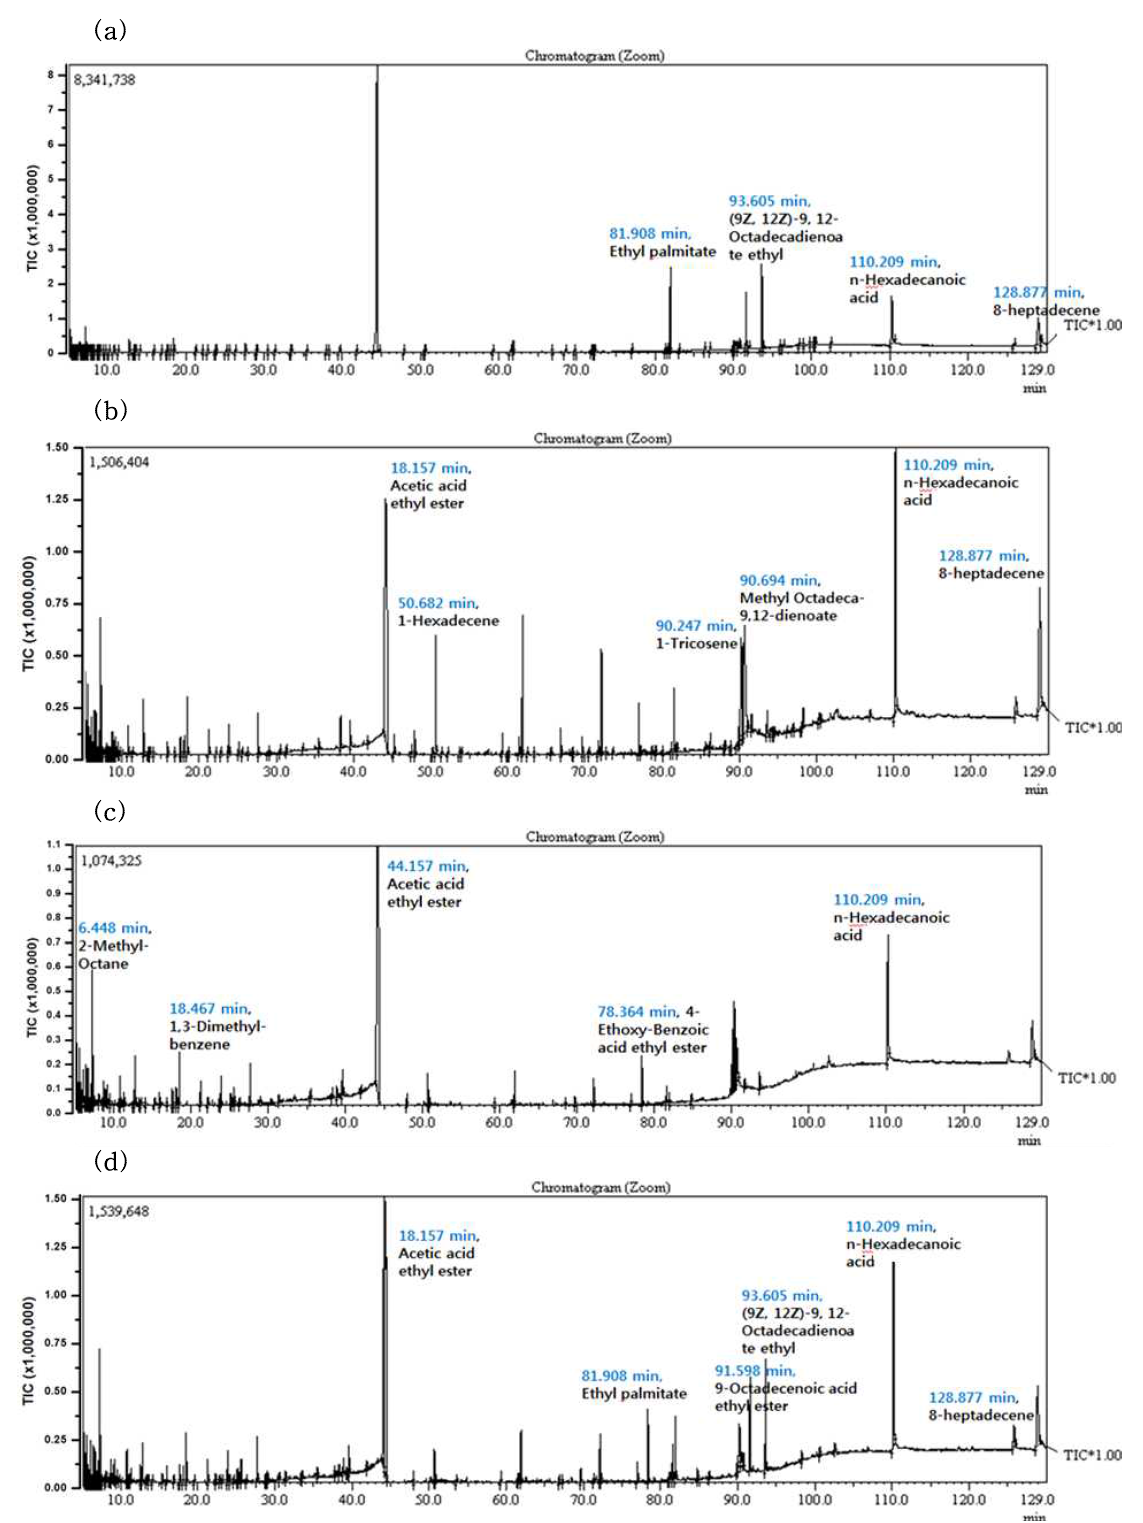 GC-MS chromatograms of volatile flavor compounds identified from traditional nuruk